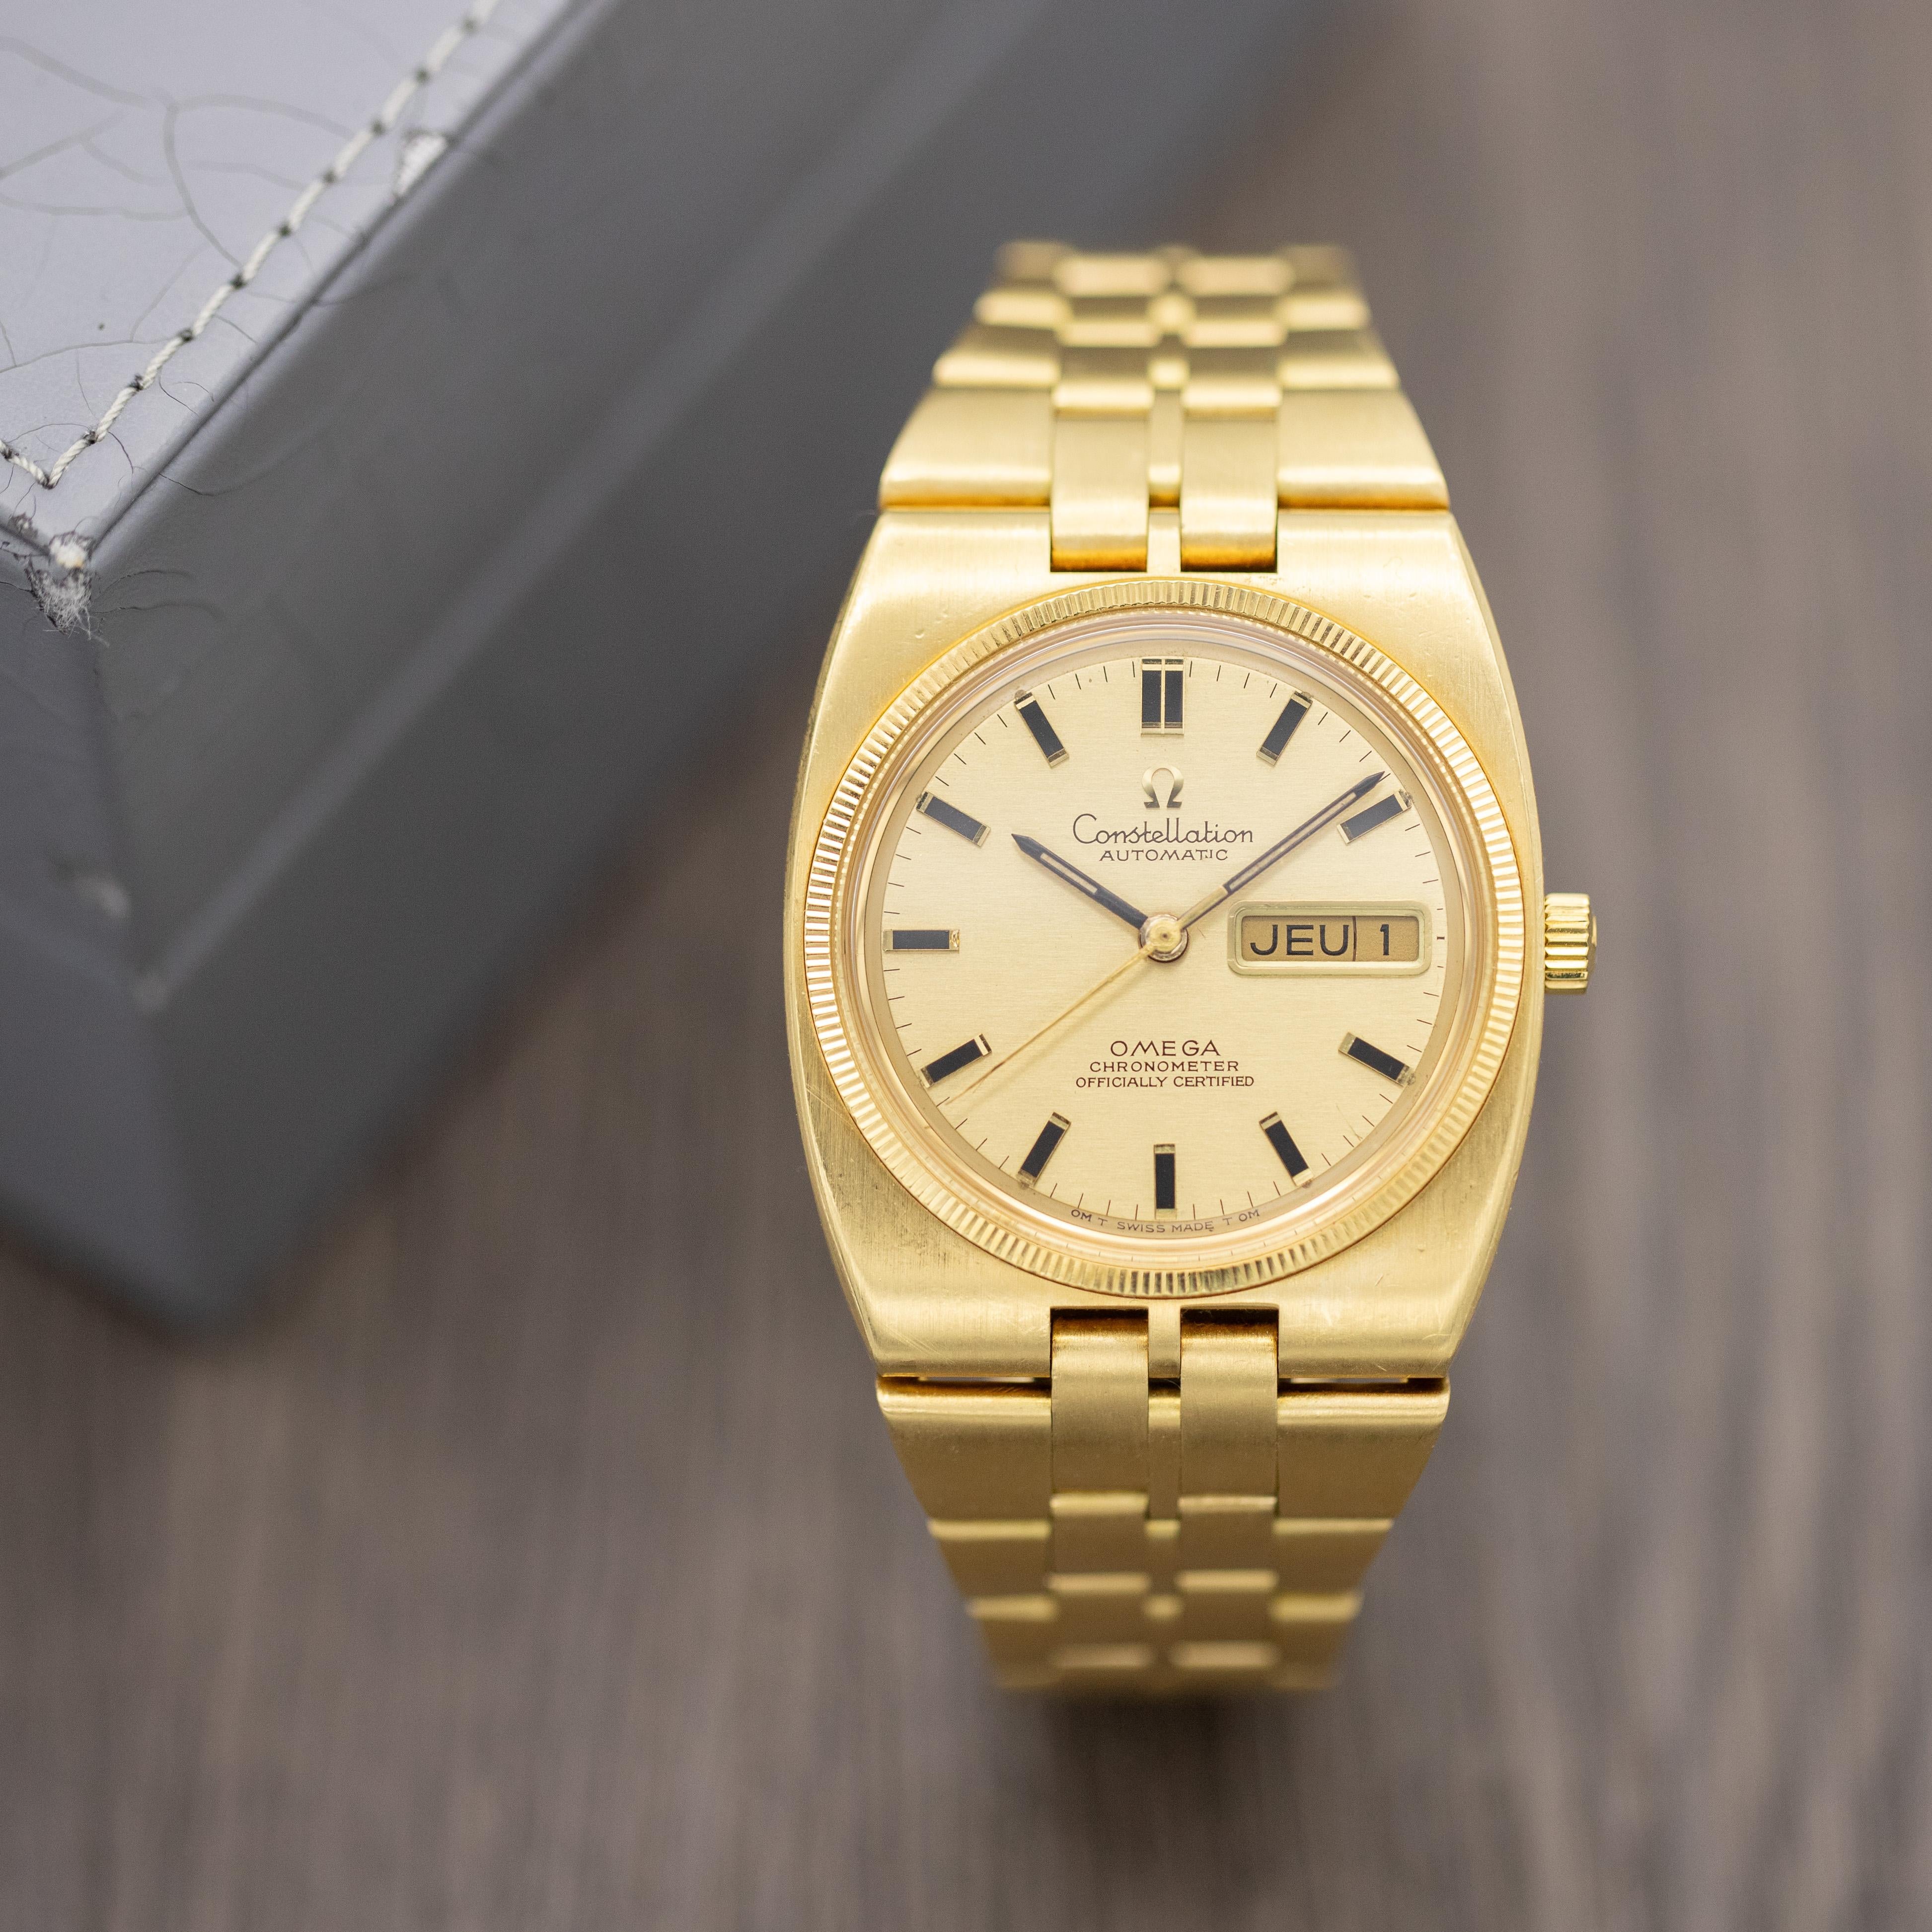 For sale is an iconic Swiss Made Omega Constellation Automatic Chronometer with reference number 168.045, dating back to 1969 based on its serial number. The case measures 36mm wide by 40mm high, and seamlessly flows over into the integrated